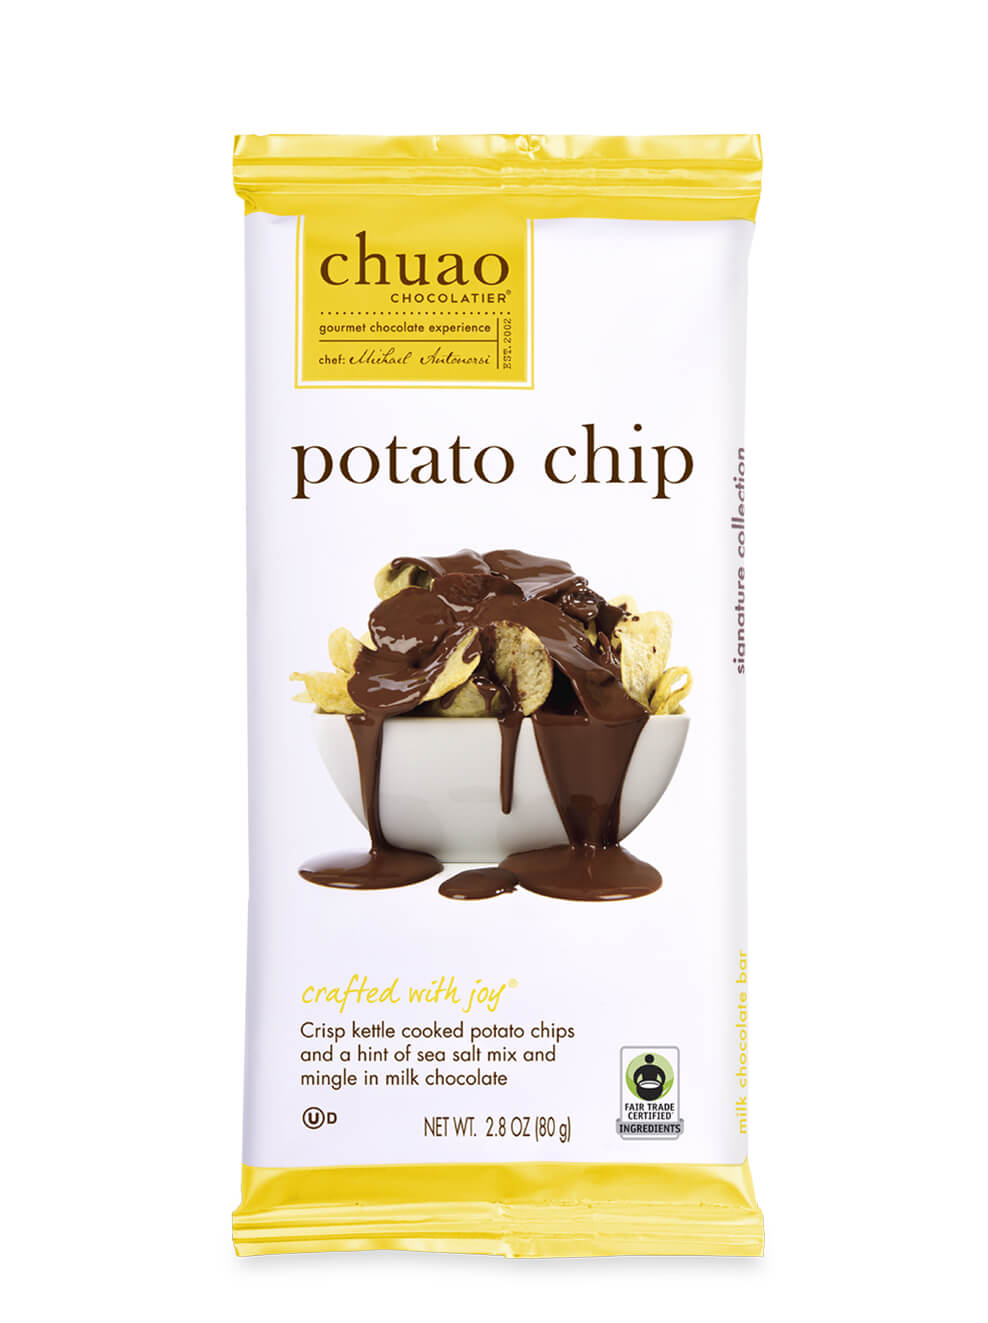 Potato Chip Chocolate bar with yellow packaging